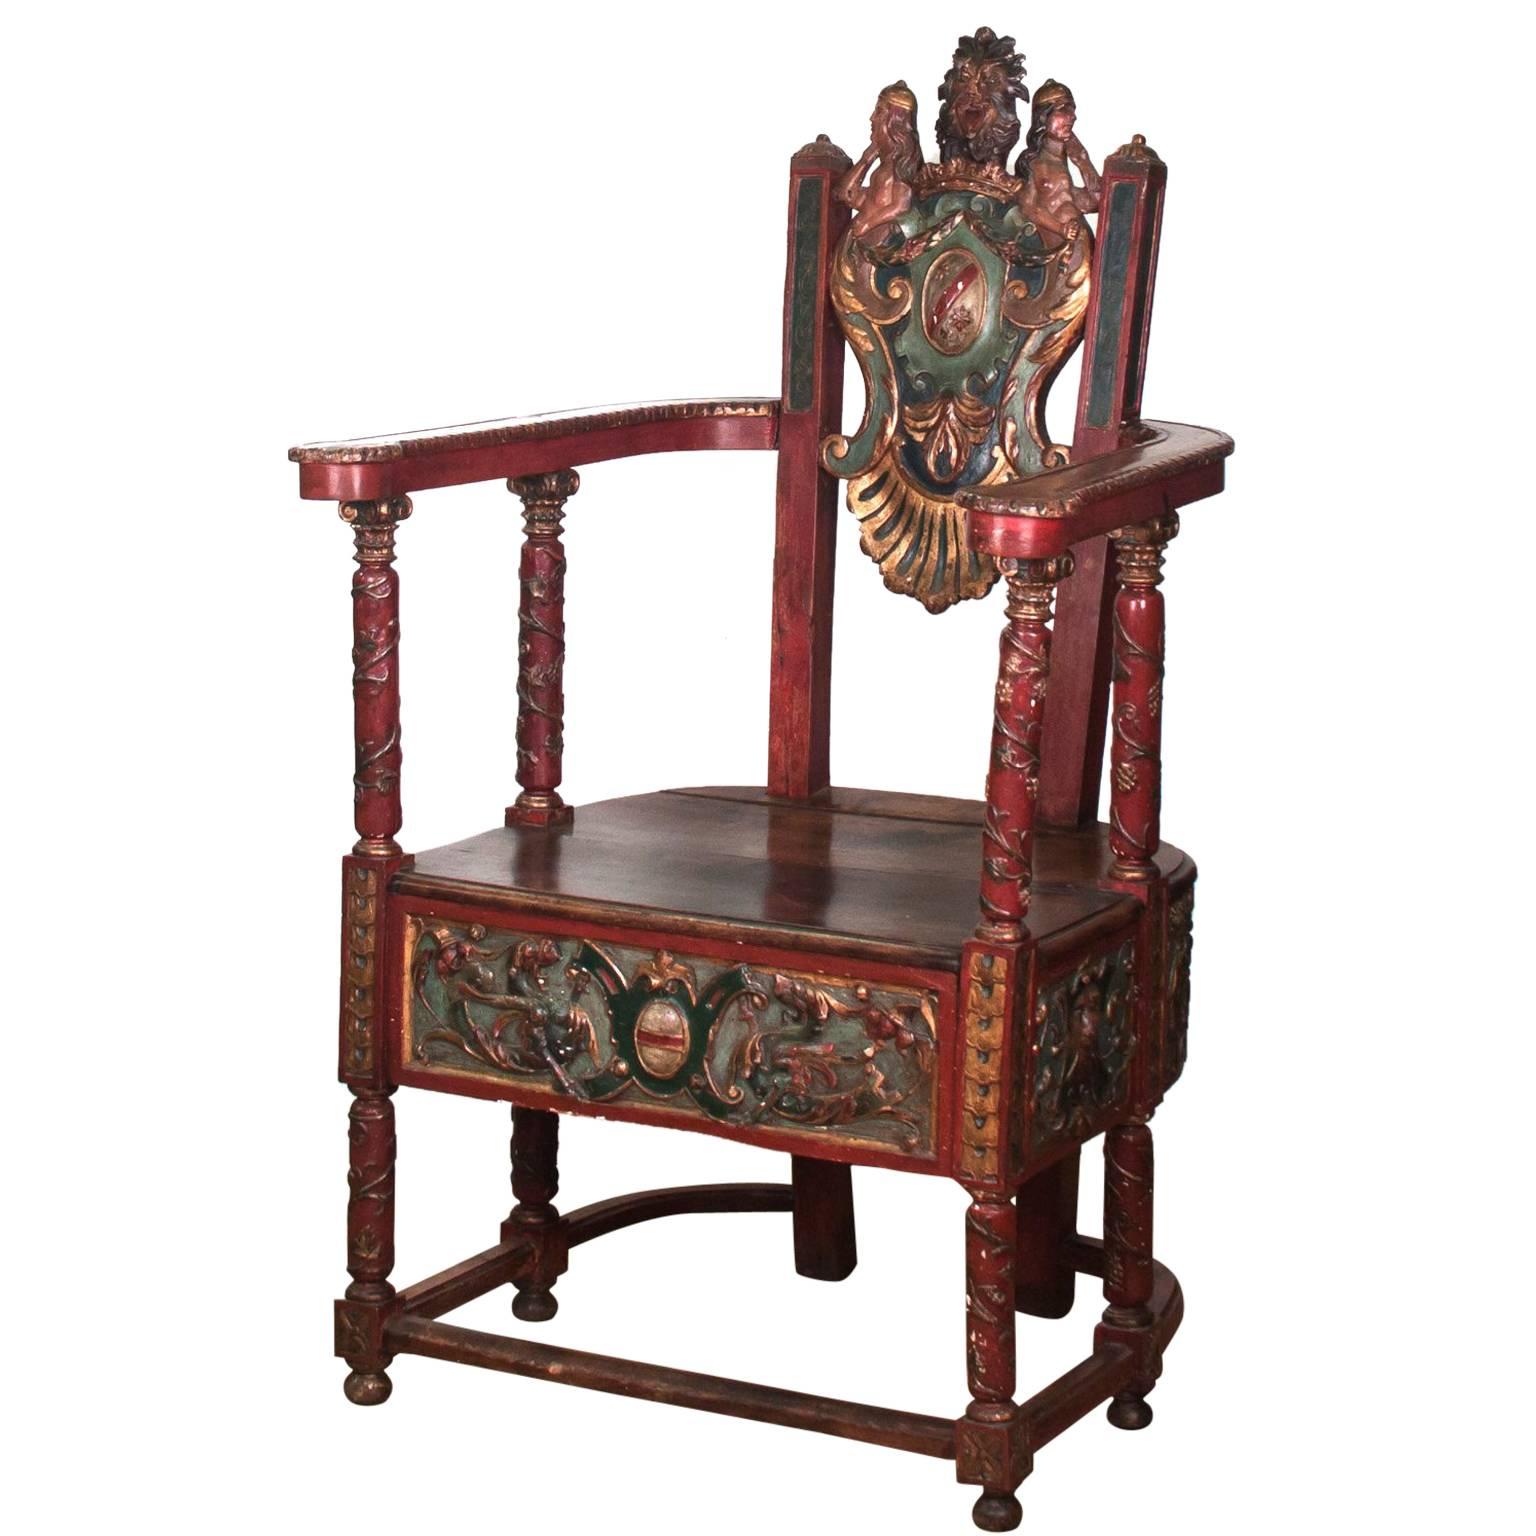 17th Century French Wooden Chair, Renaissance